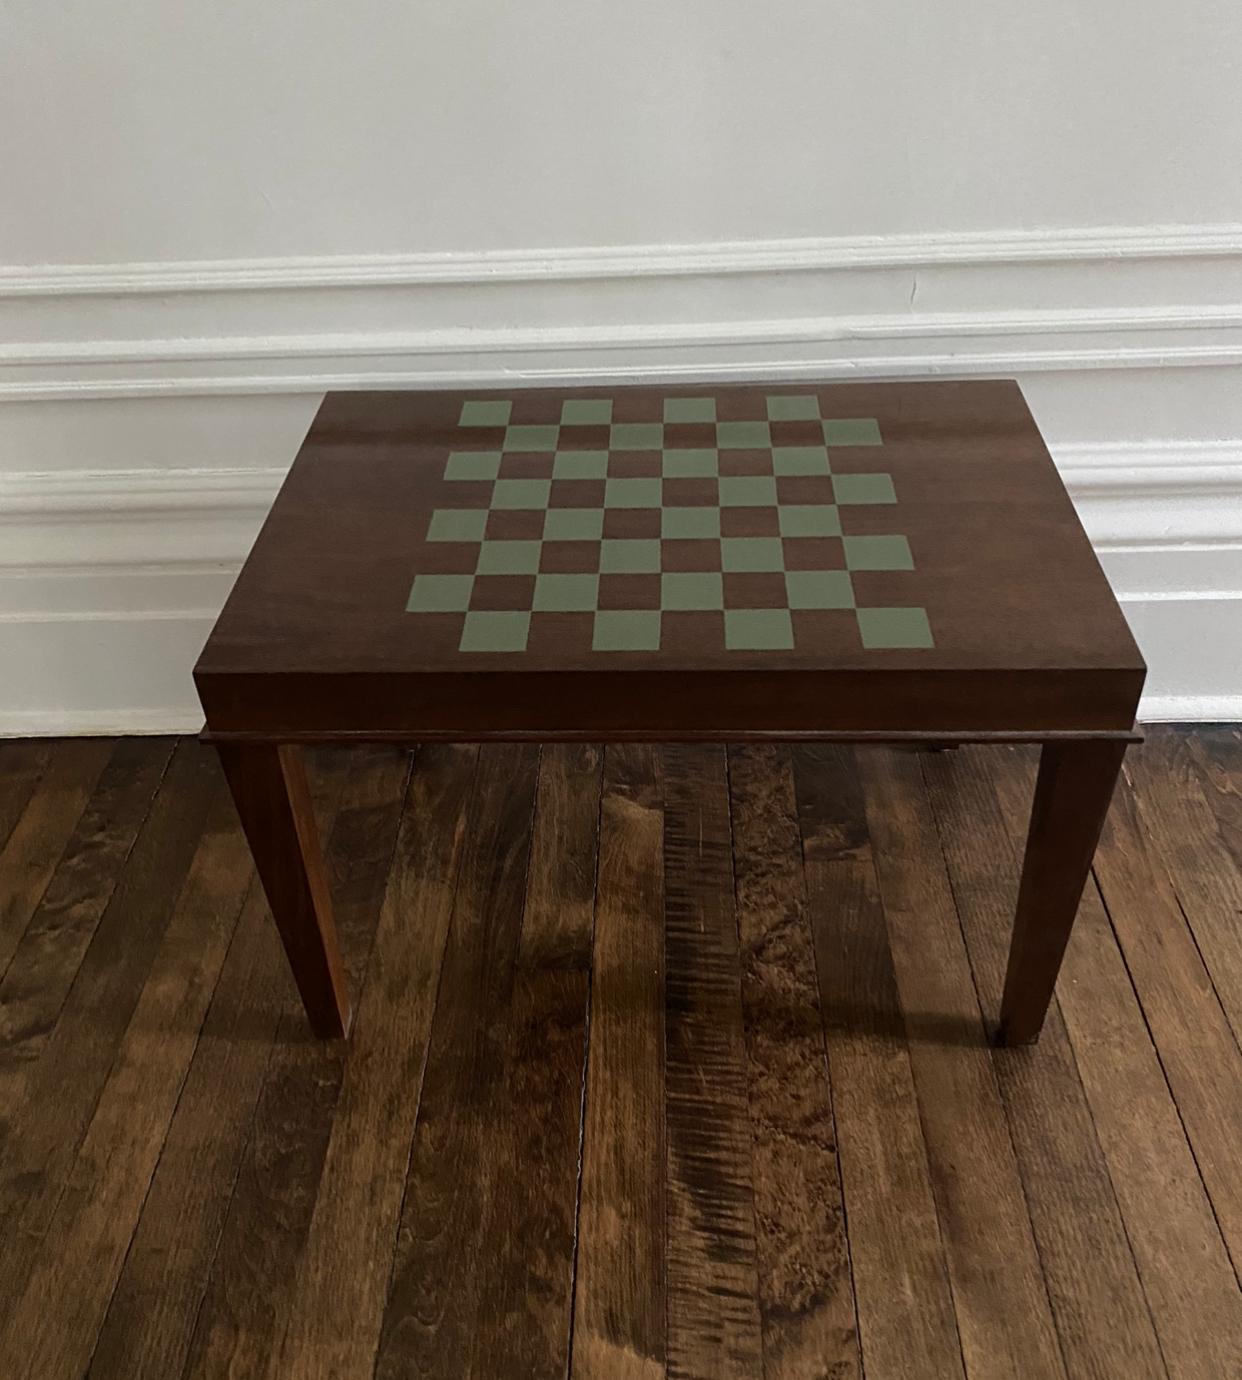 Painted Chess and Backgammon Game Tables 1